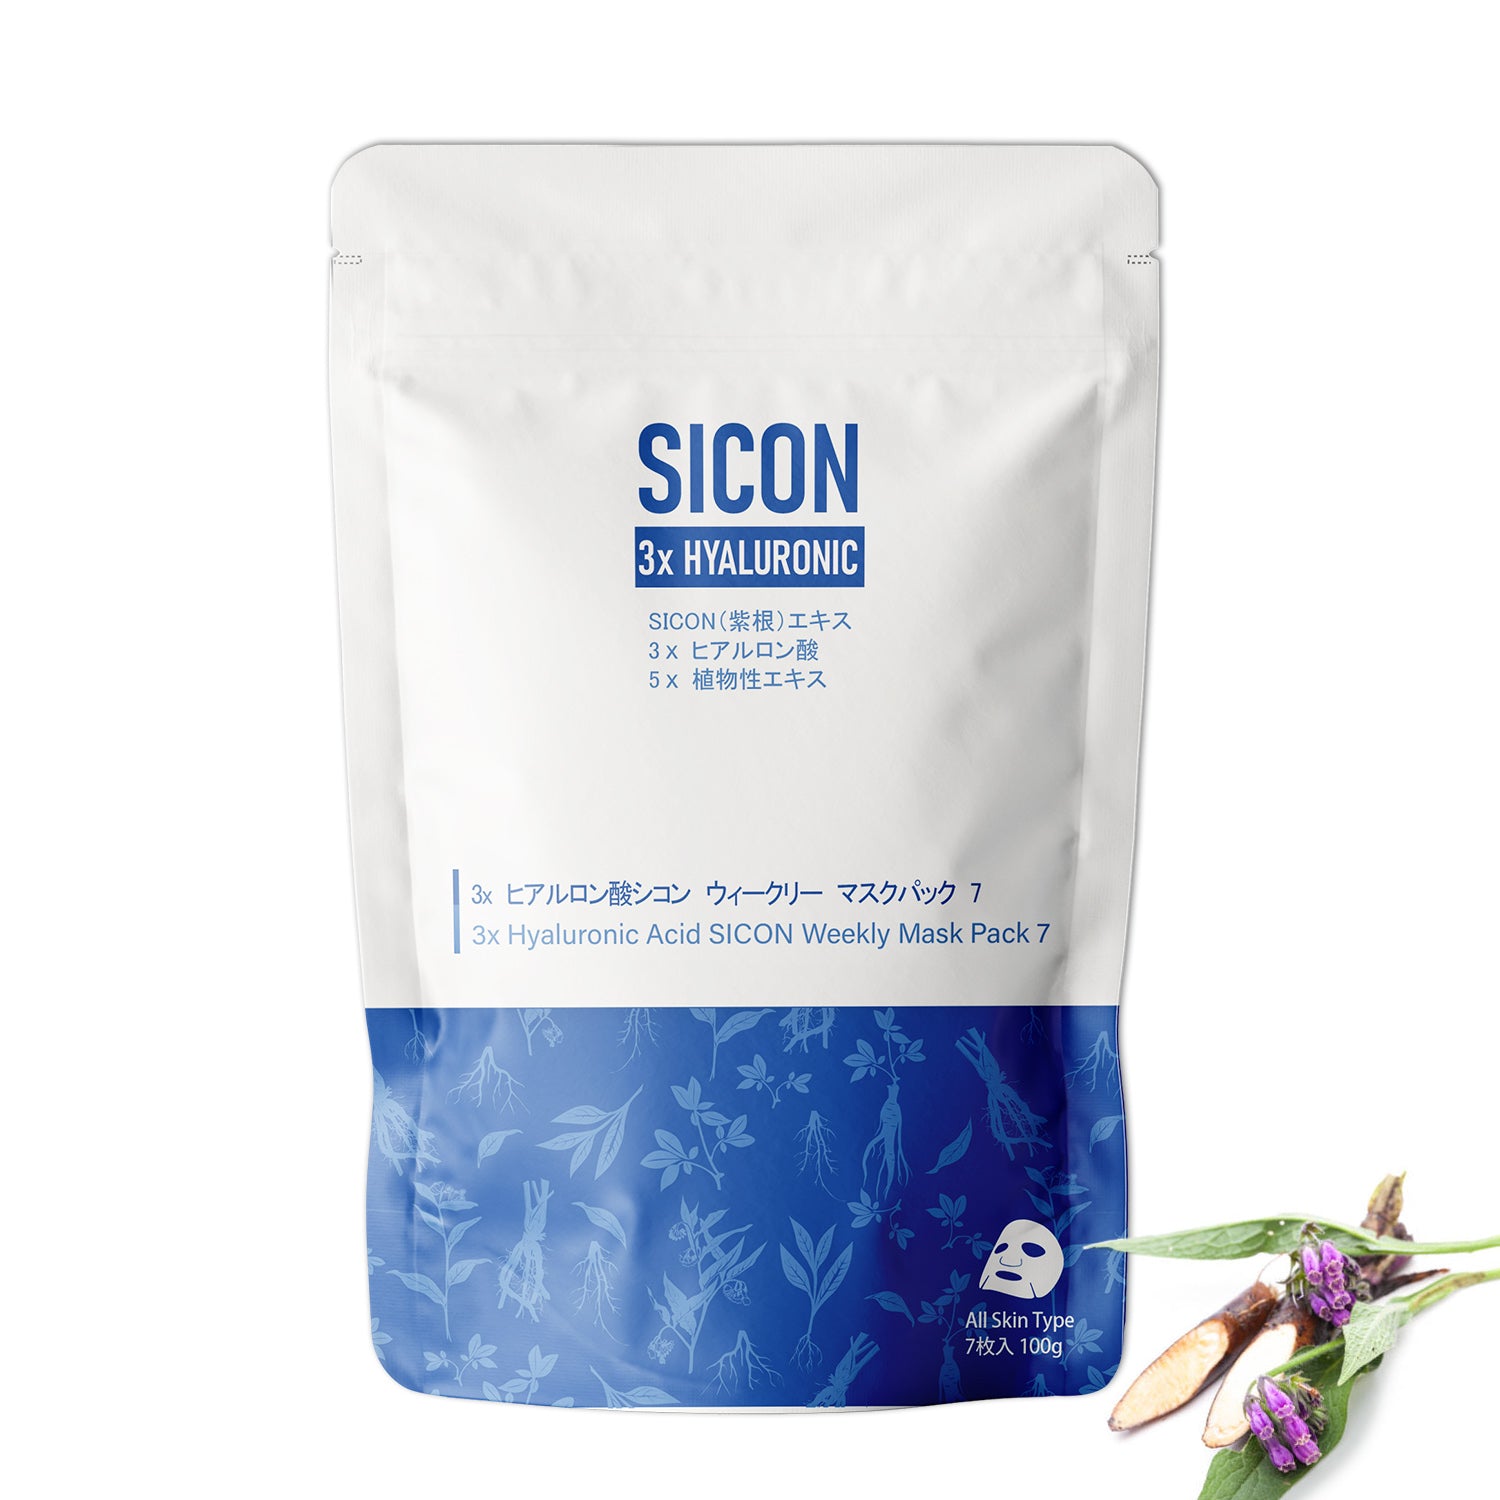 3x Hyaluronic Acid SICON Weekly Face Mask Pack 7 Sheets [SI001-B-100] - Mitomo 